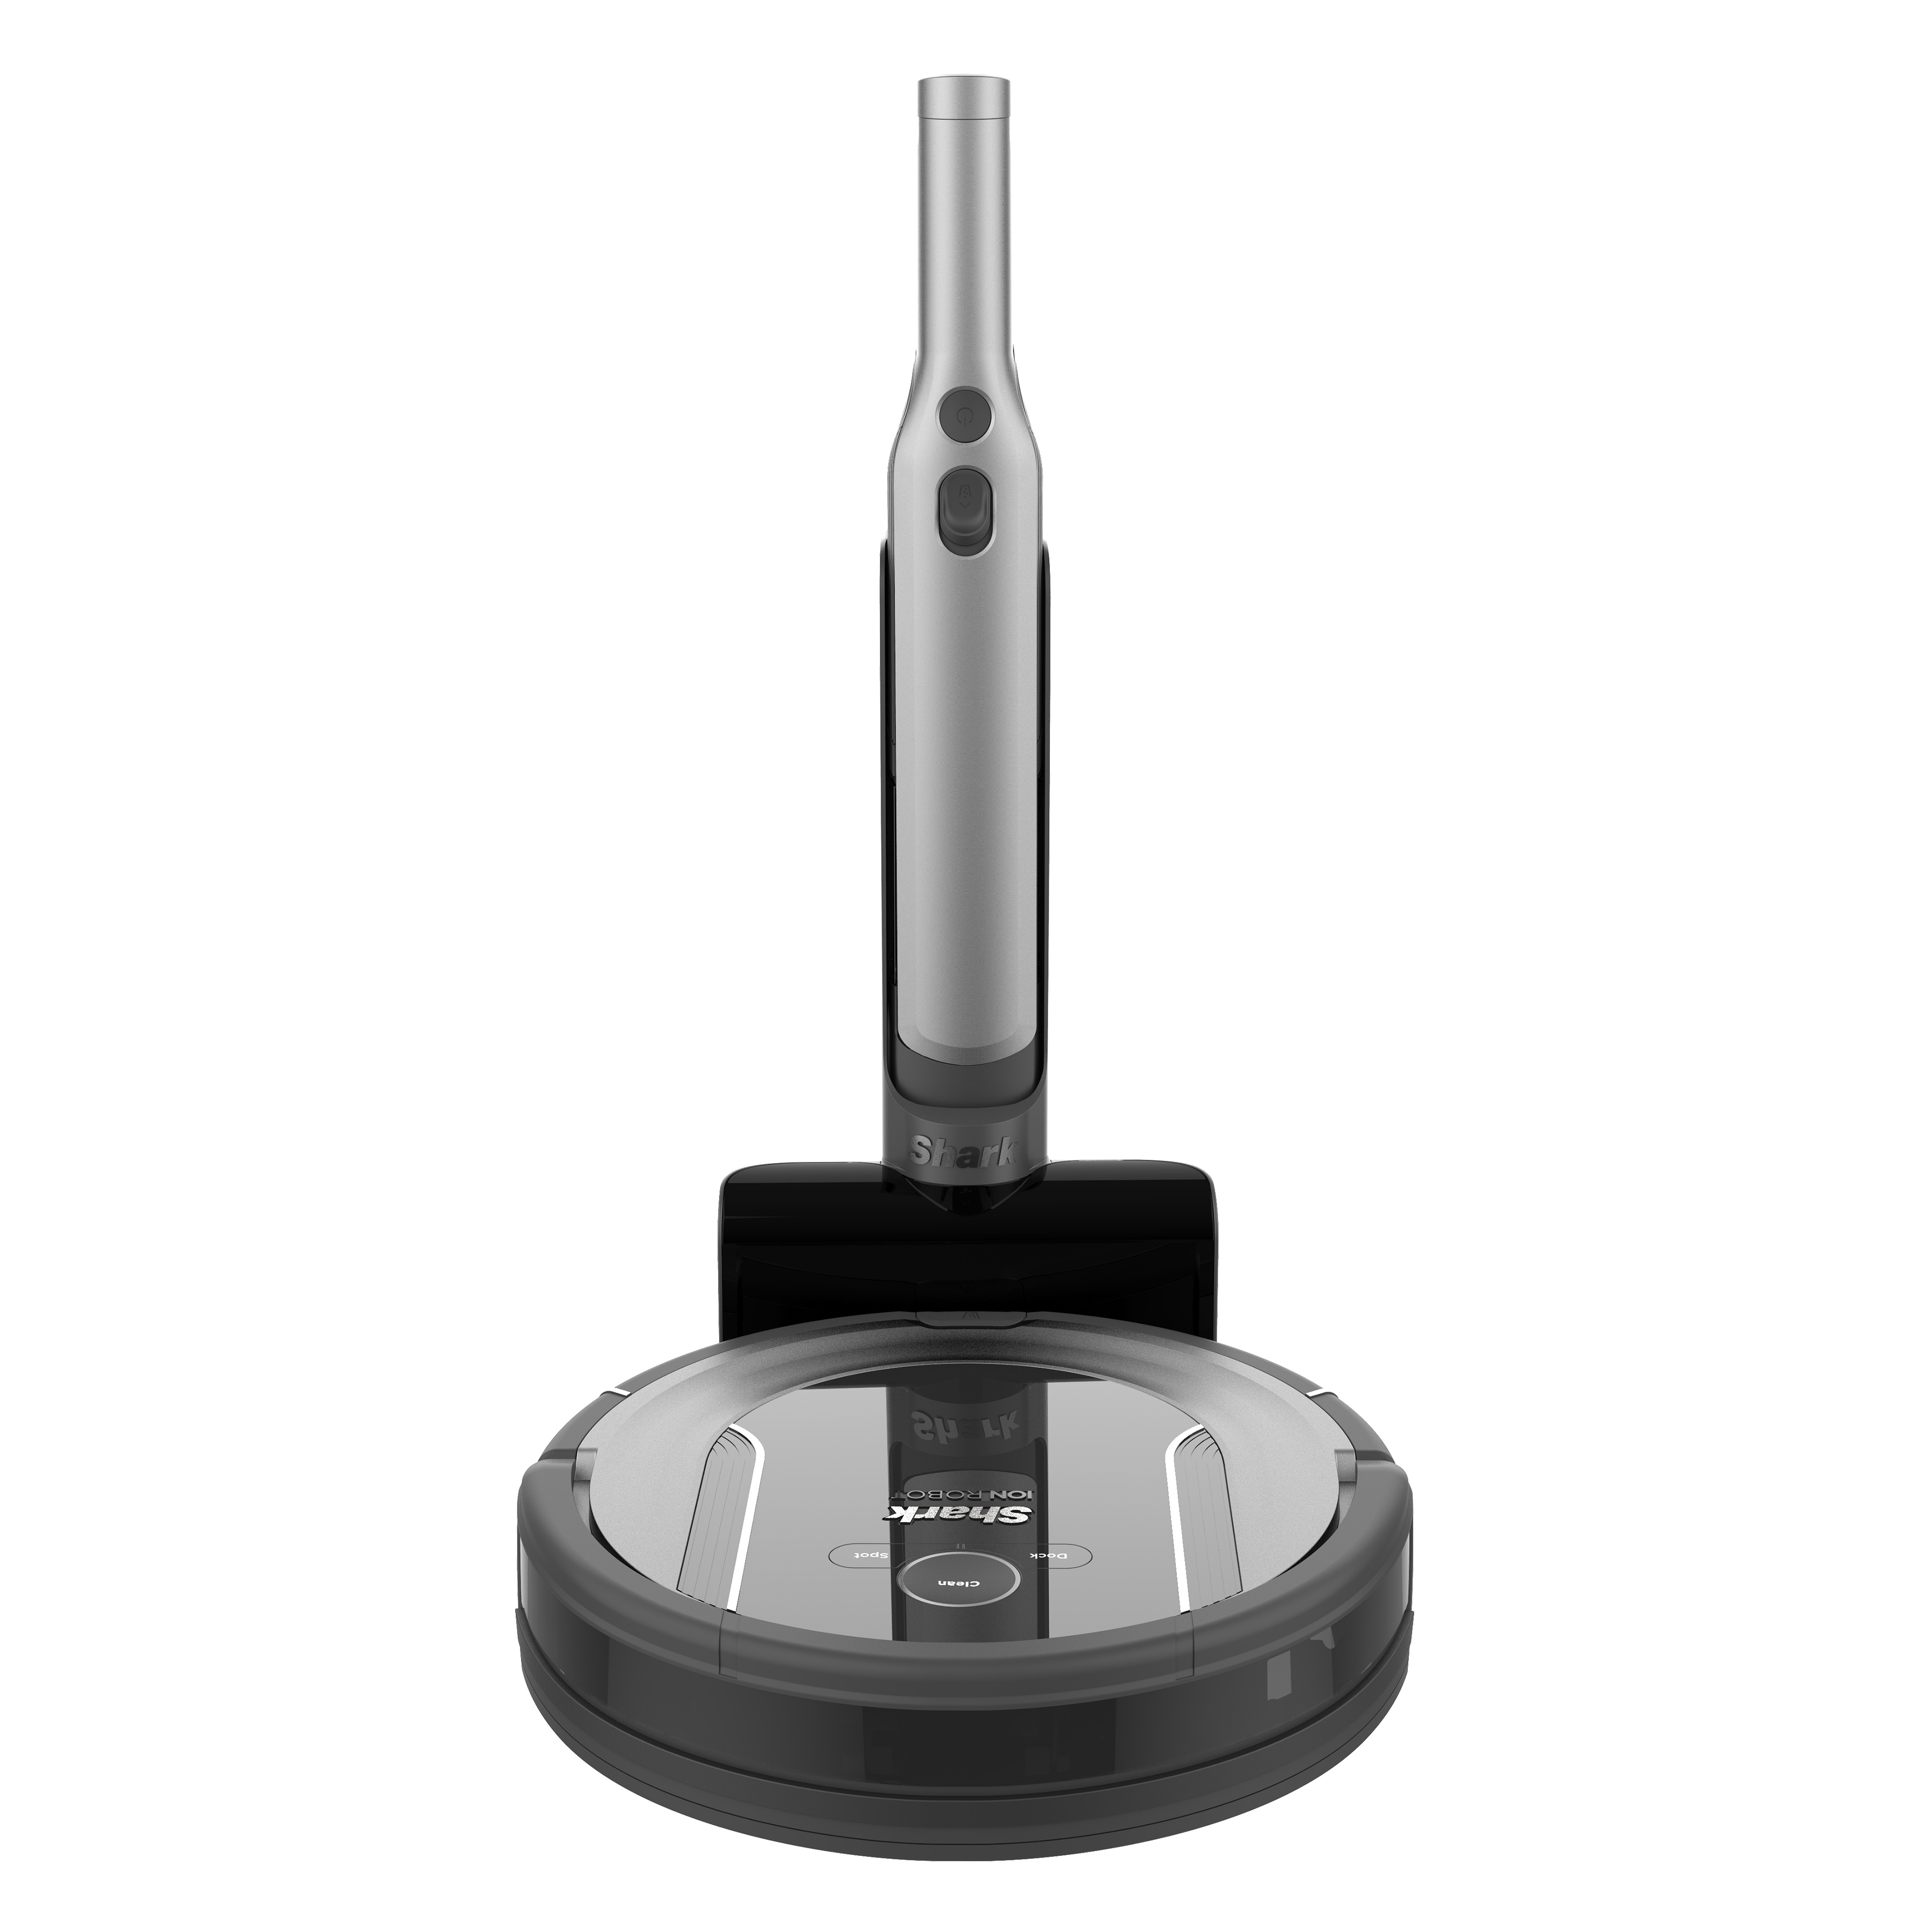 SHARK ION Robot Vacuum Cleaning System with Detachable Hand Vacuum, S86 with Wi-Fi - RV850WV - image 1 of 10